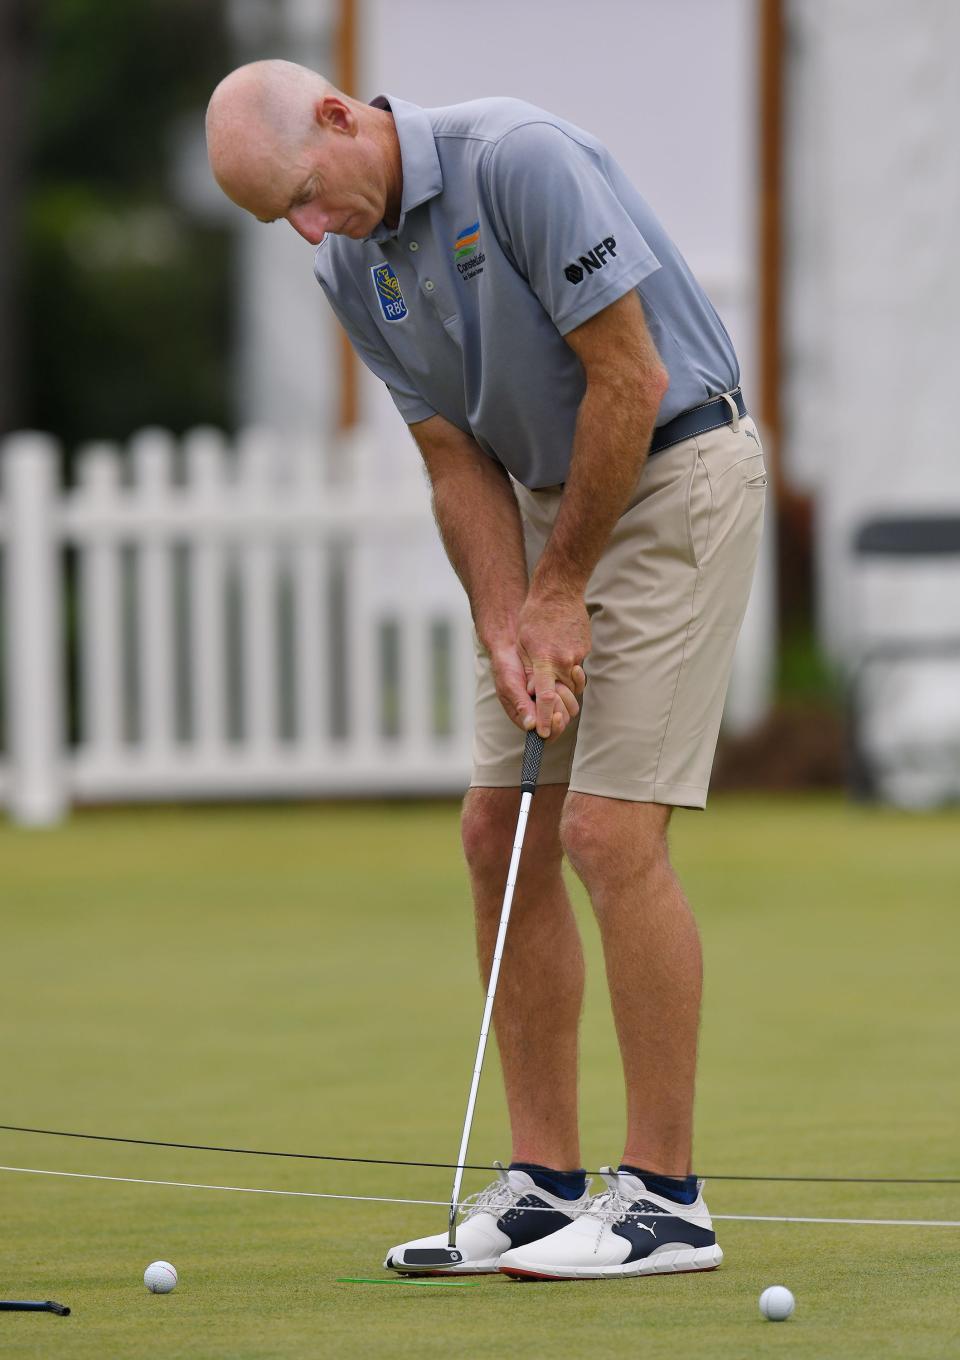 Constellation Furyk & Friends tournament host Jim Furyk tied for fourth last year at the Timuquana Country Club.